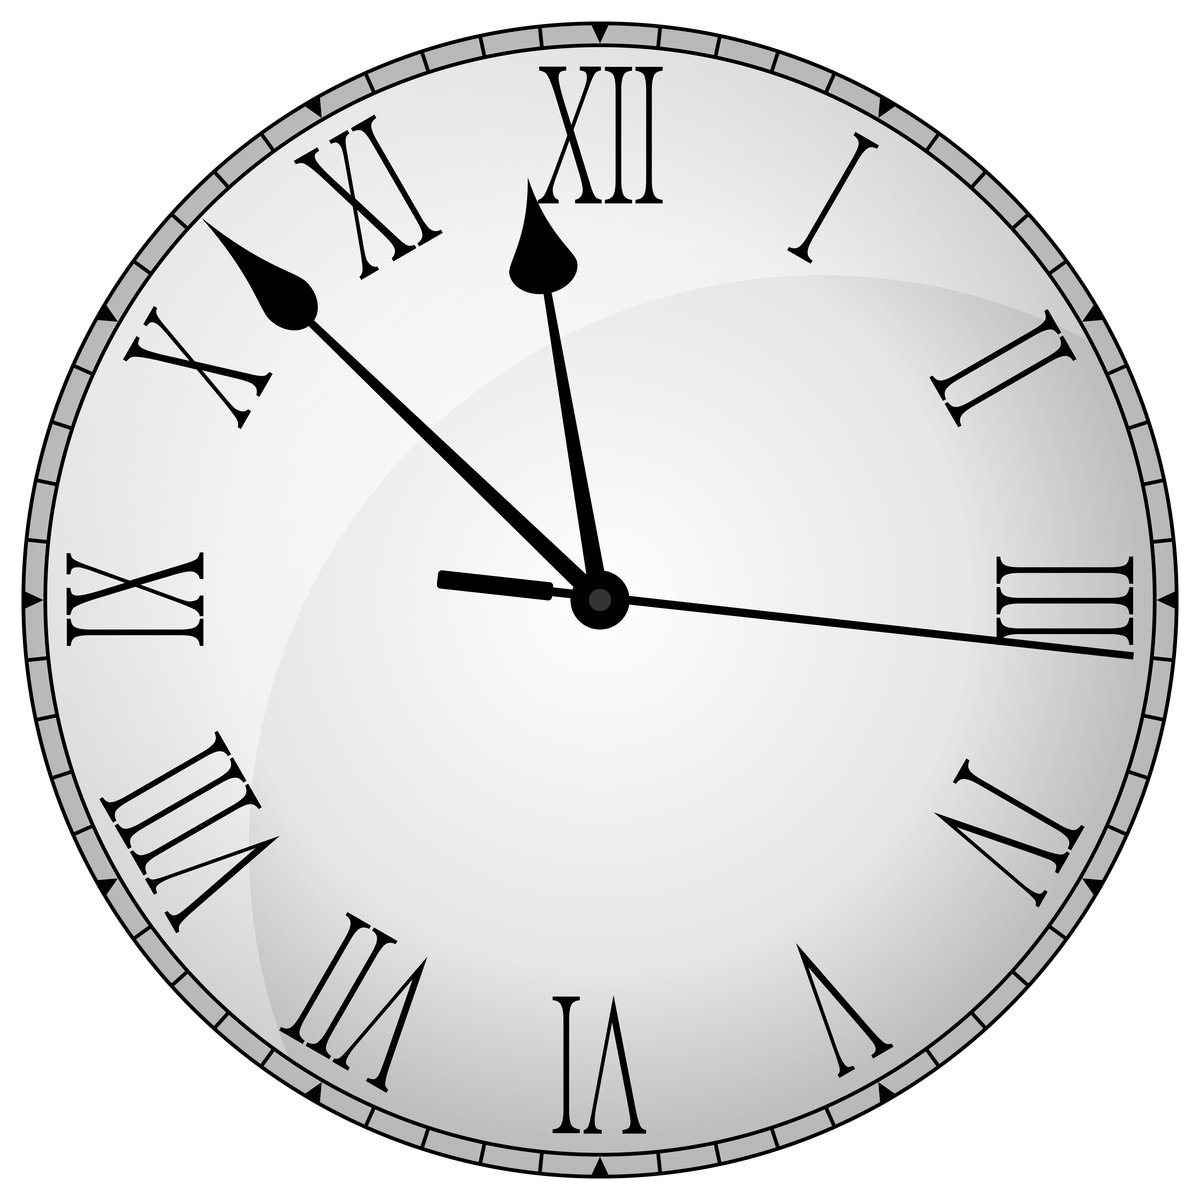 a clock showing the time of three o'clock